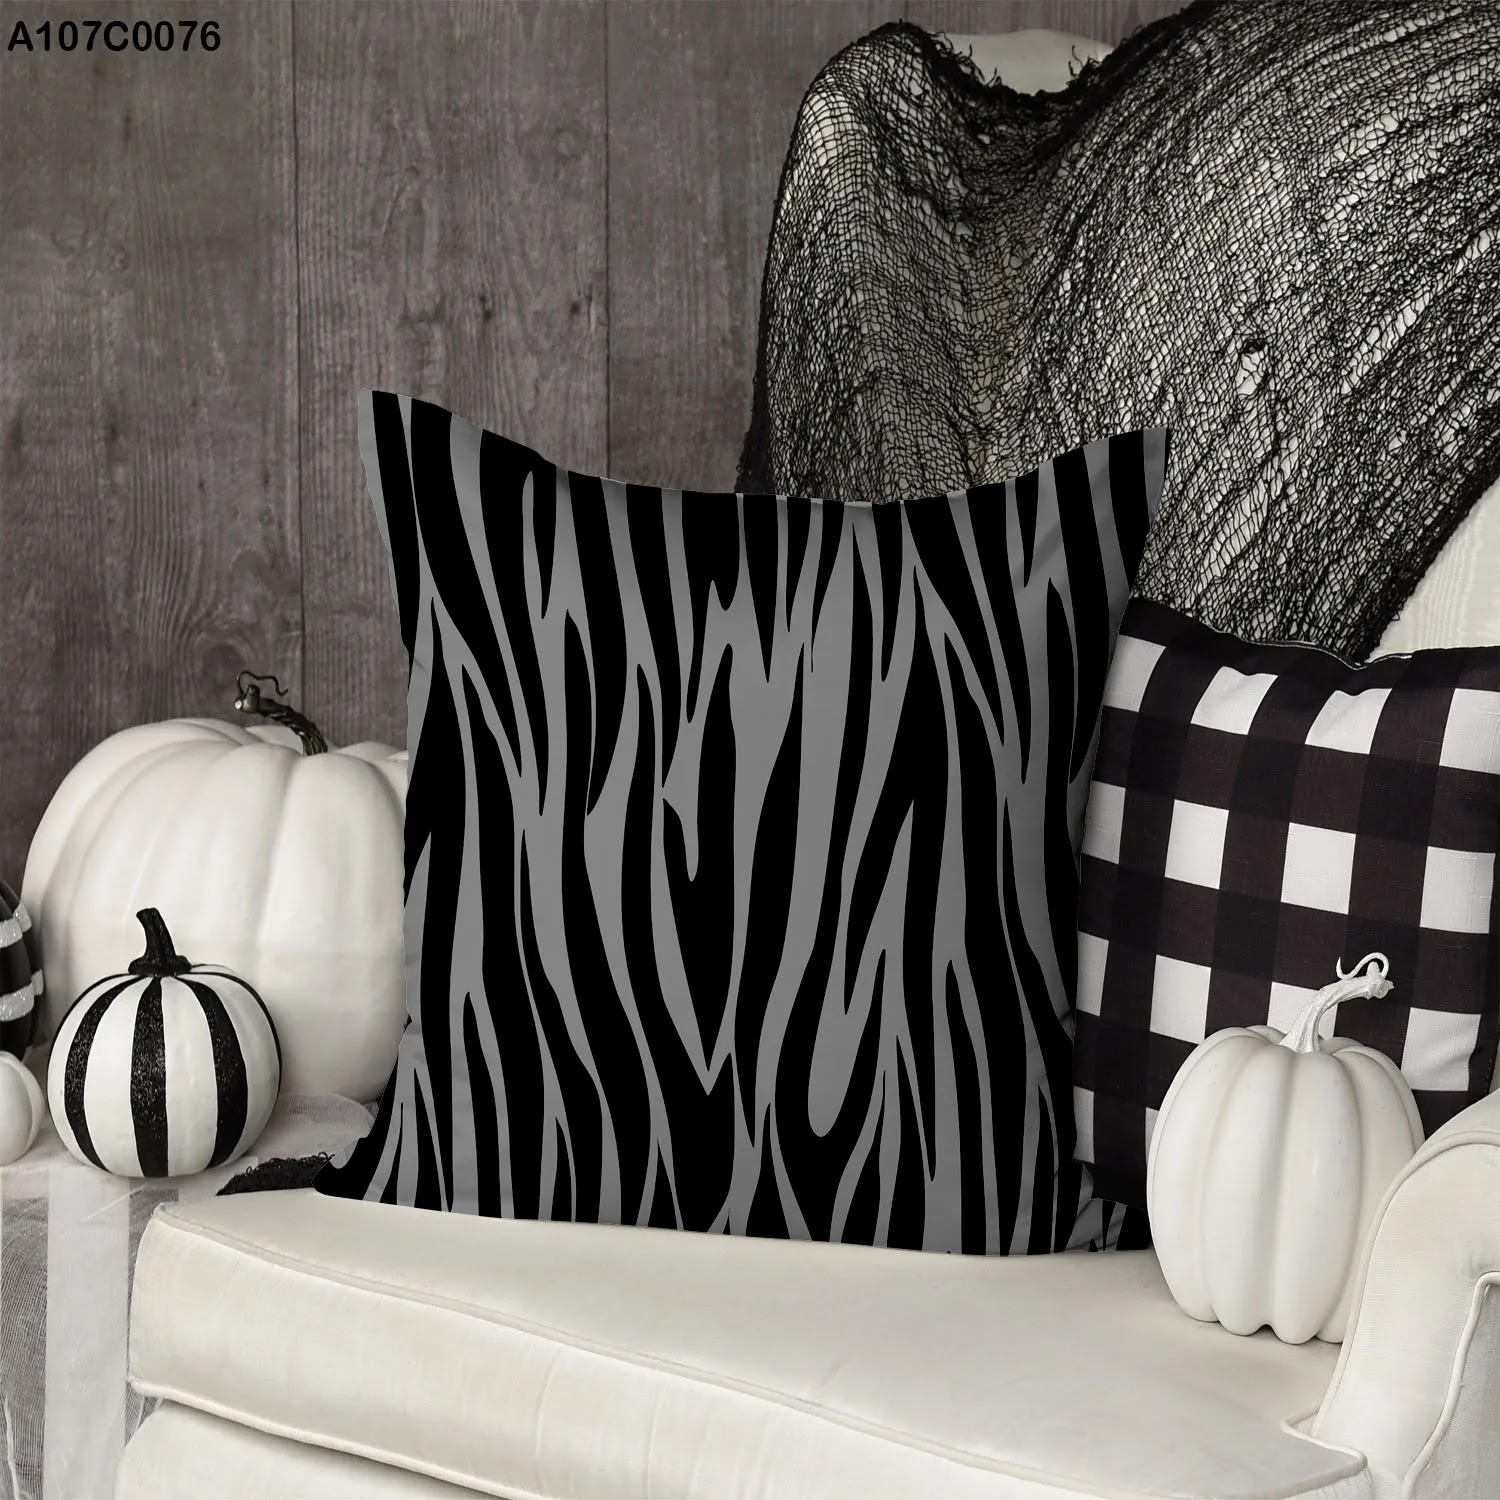 Black and gray striped pillow case